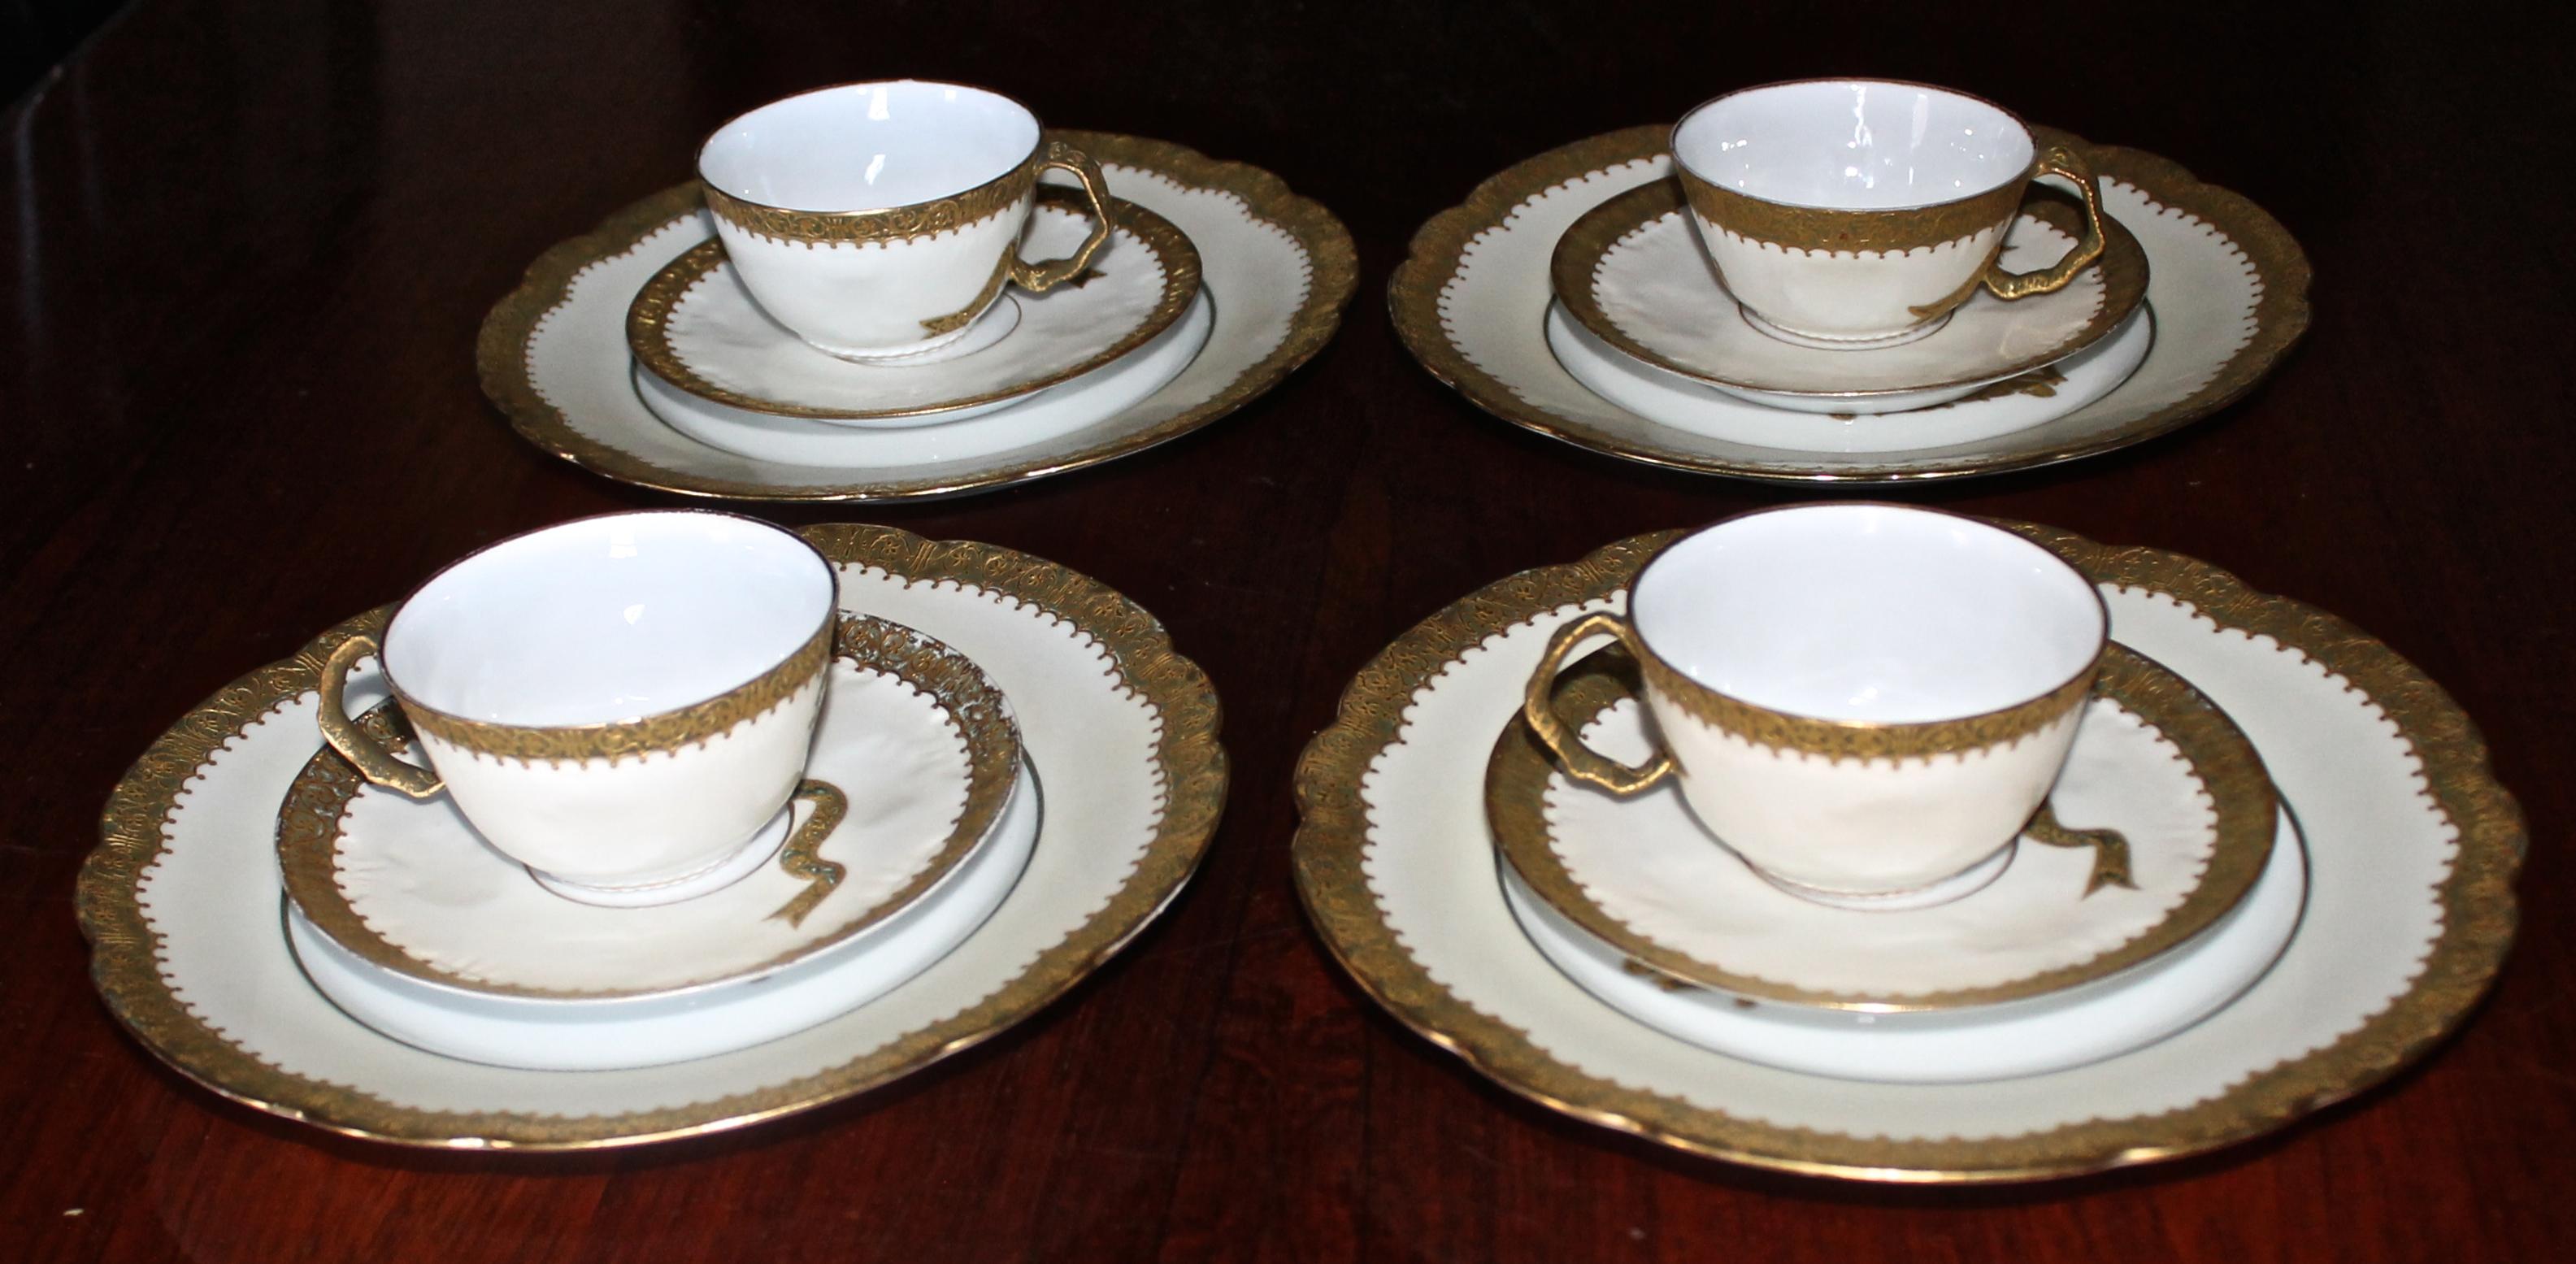 Each service comprised of a cup, saucer and dessert plate. 12 pieces in all. All hand painted in 24 Ct. gold by the Paris firm Mansard c. 1890. Blanks most likely Sevres. Cup handles are beautiful gilded ribbons. Dessert plates are 8 5/8